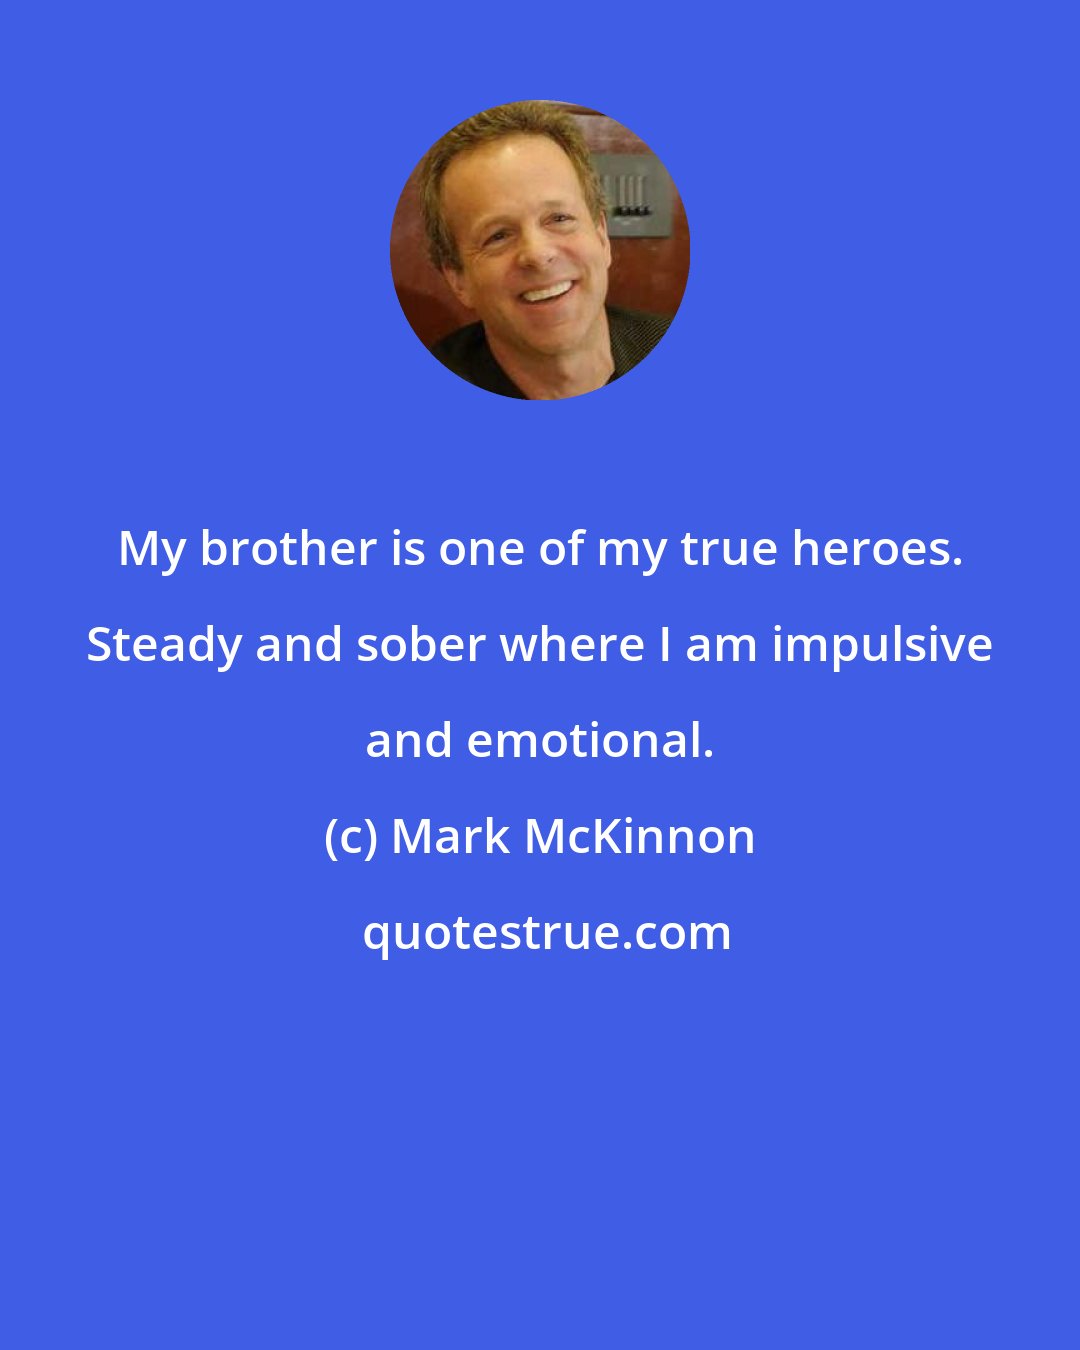 Mark McKinnon: My brother is one of my true heroes. Steady and sober where I am impulsive and emotional.